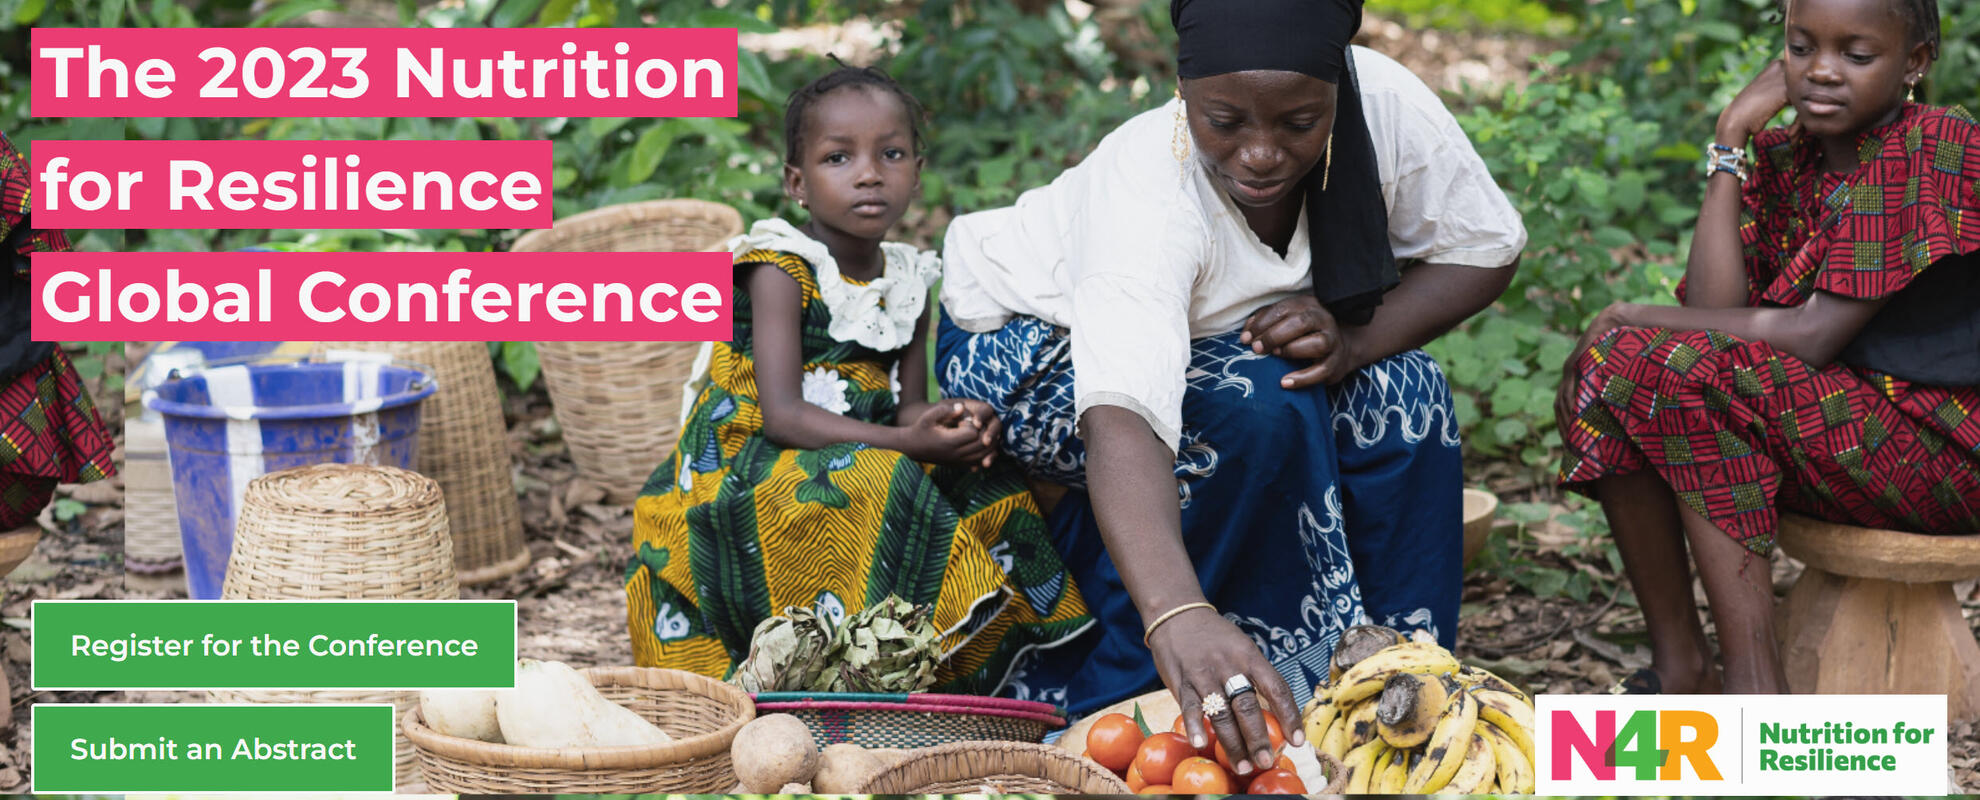 The 2023 Nutrition for Resilience Global Conference